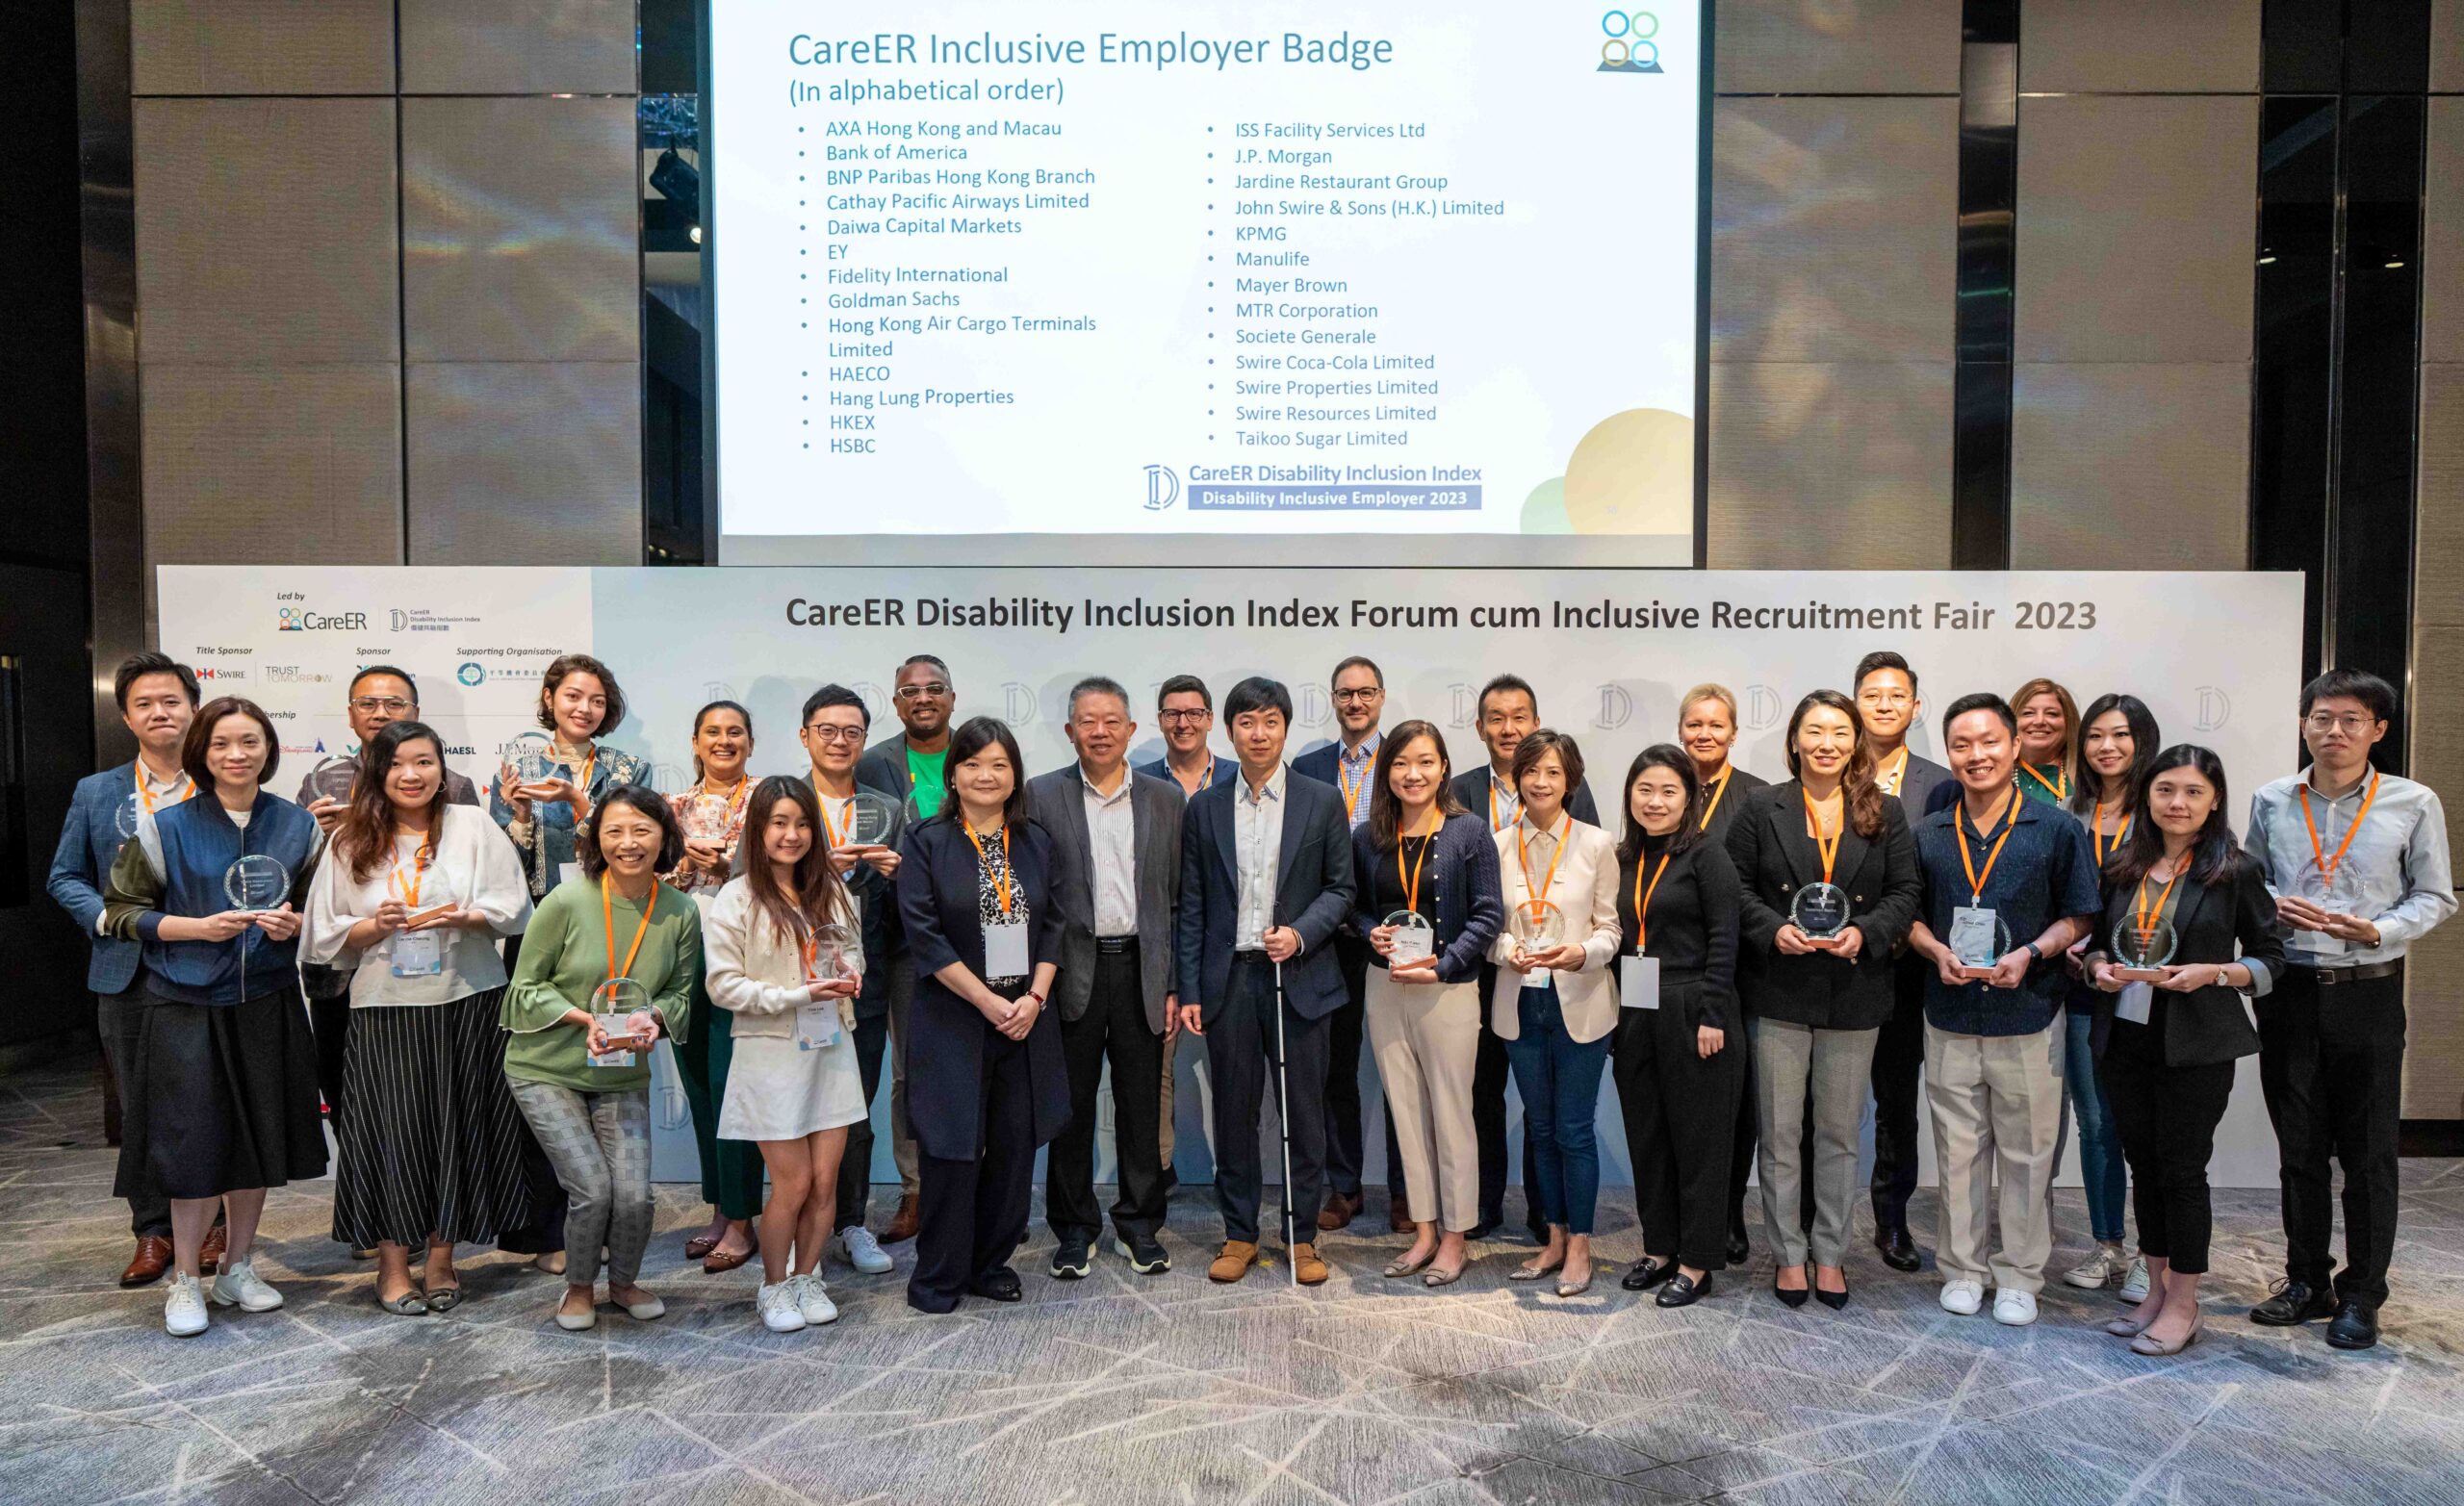 Group photo of 26 Employer Badge recipients of 2023